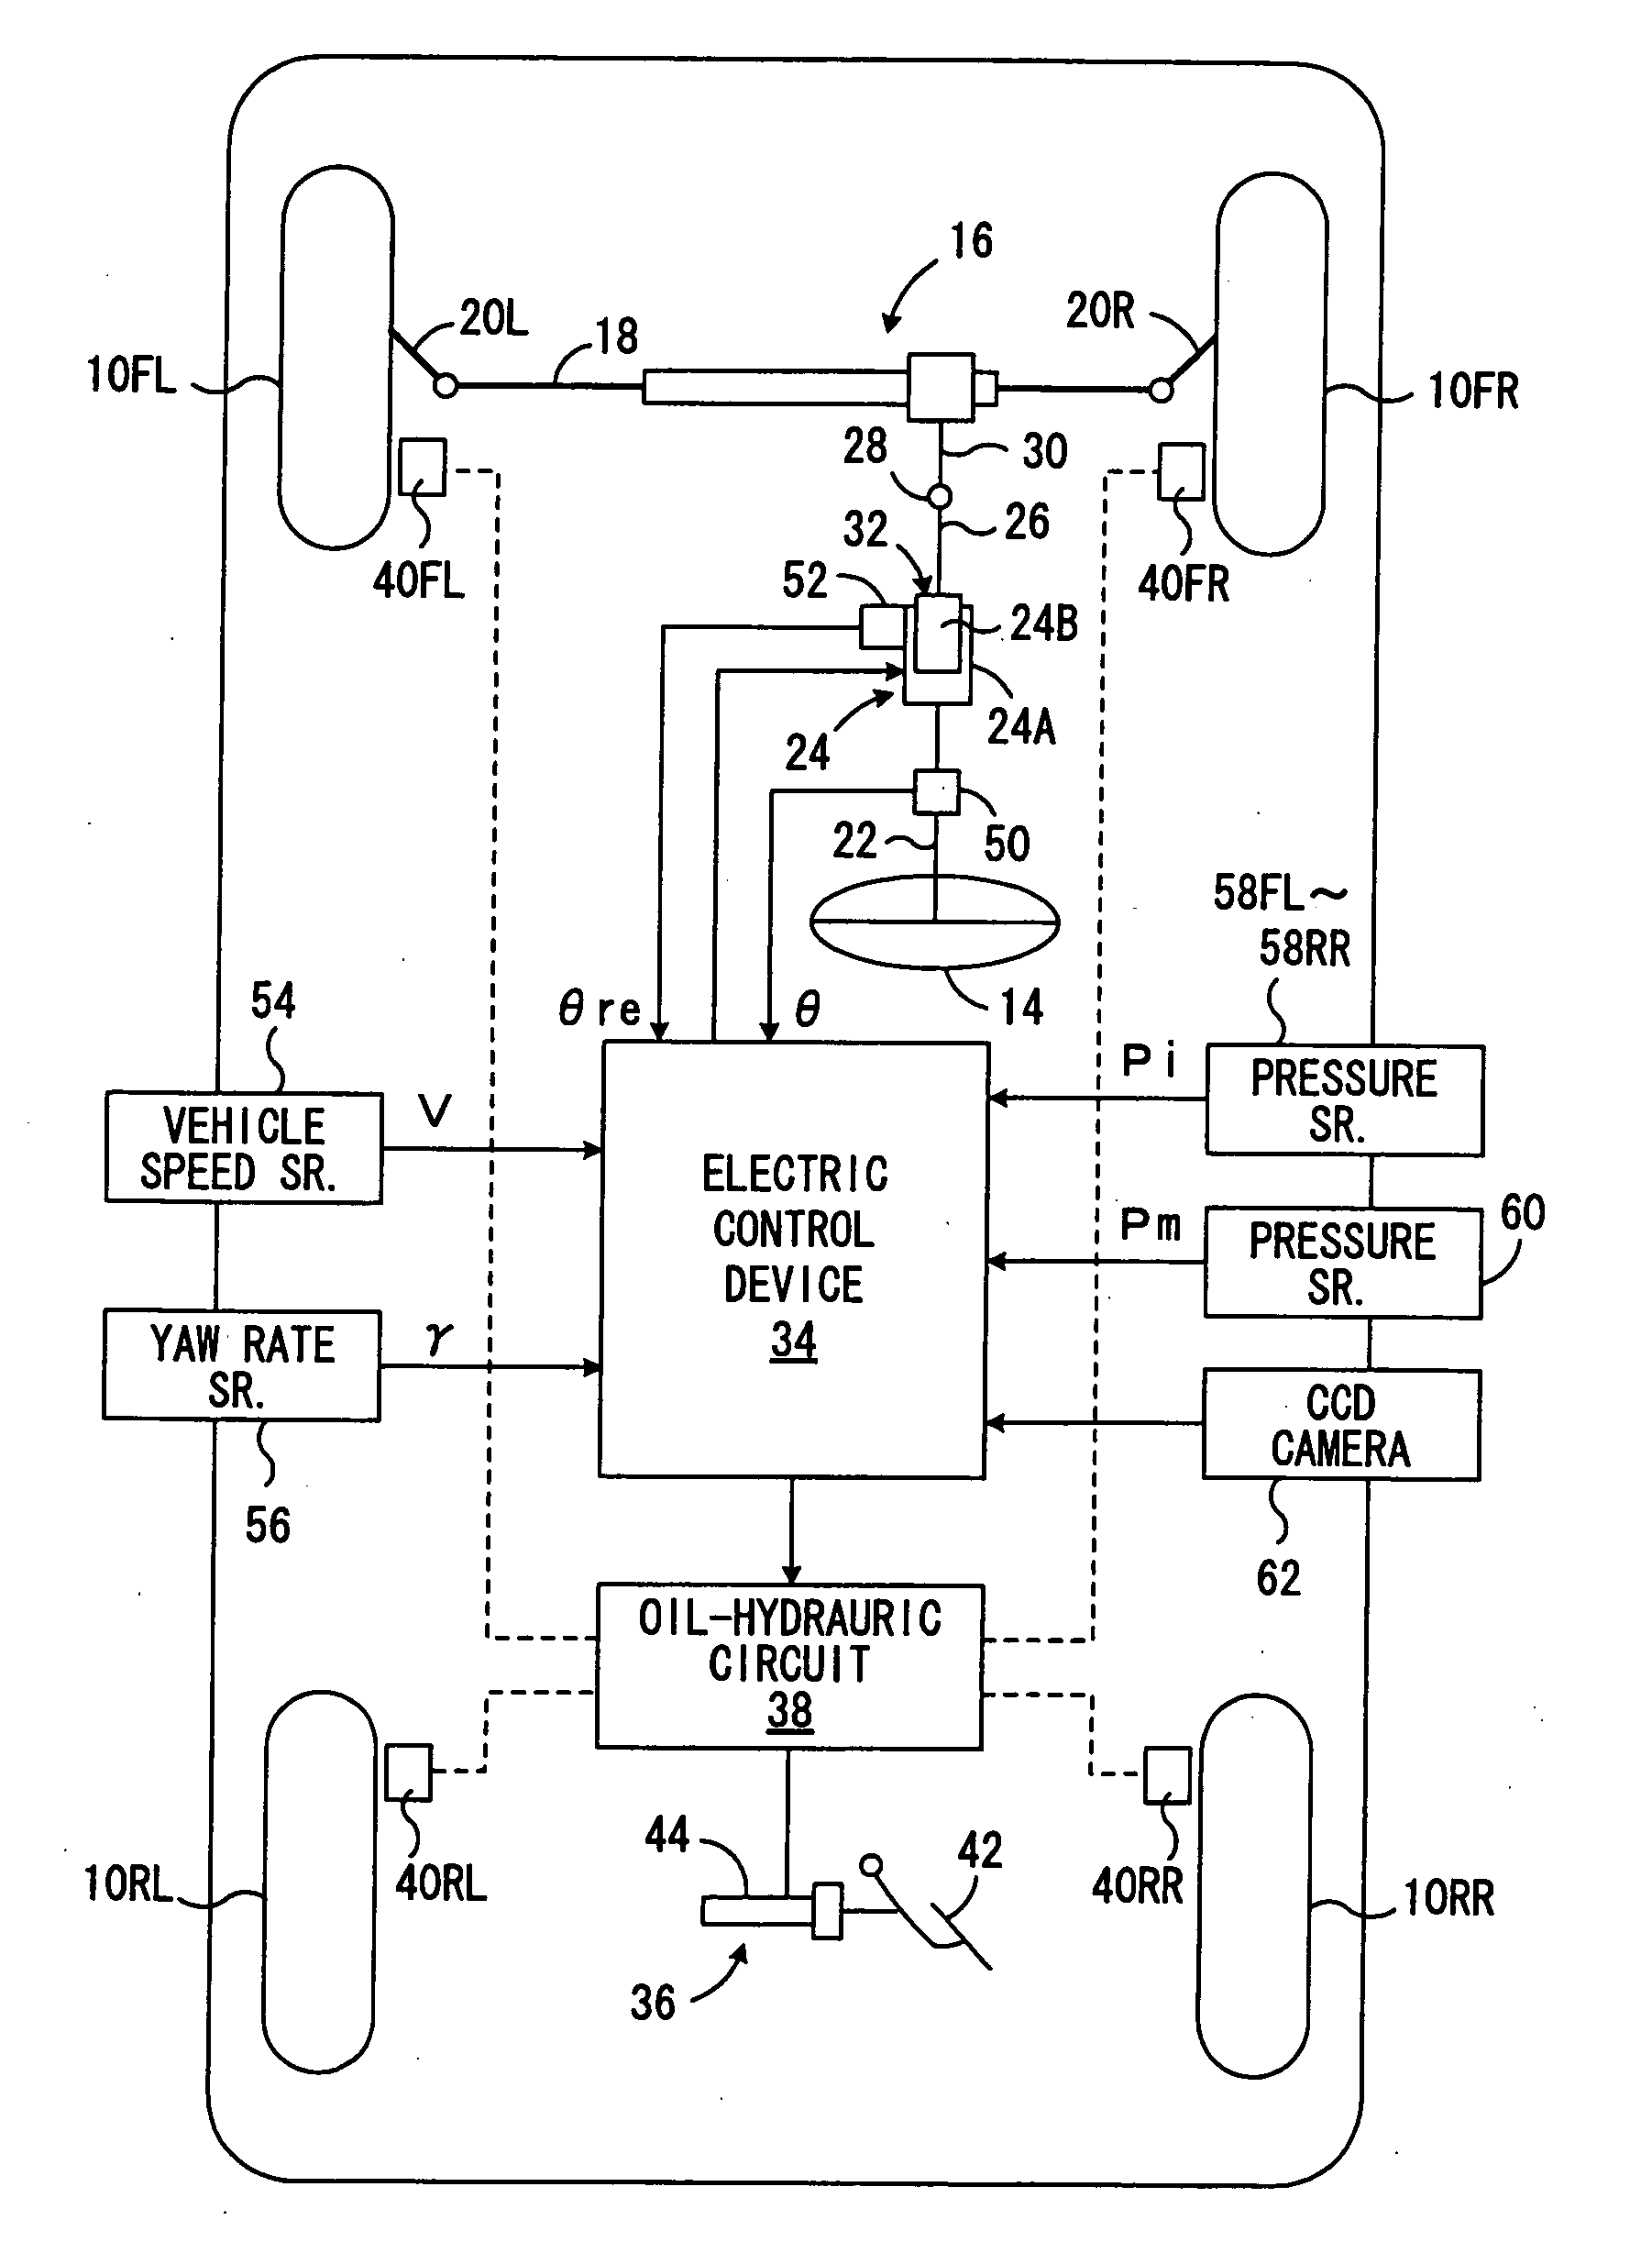 Running stability control device for turn running along curved road